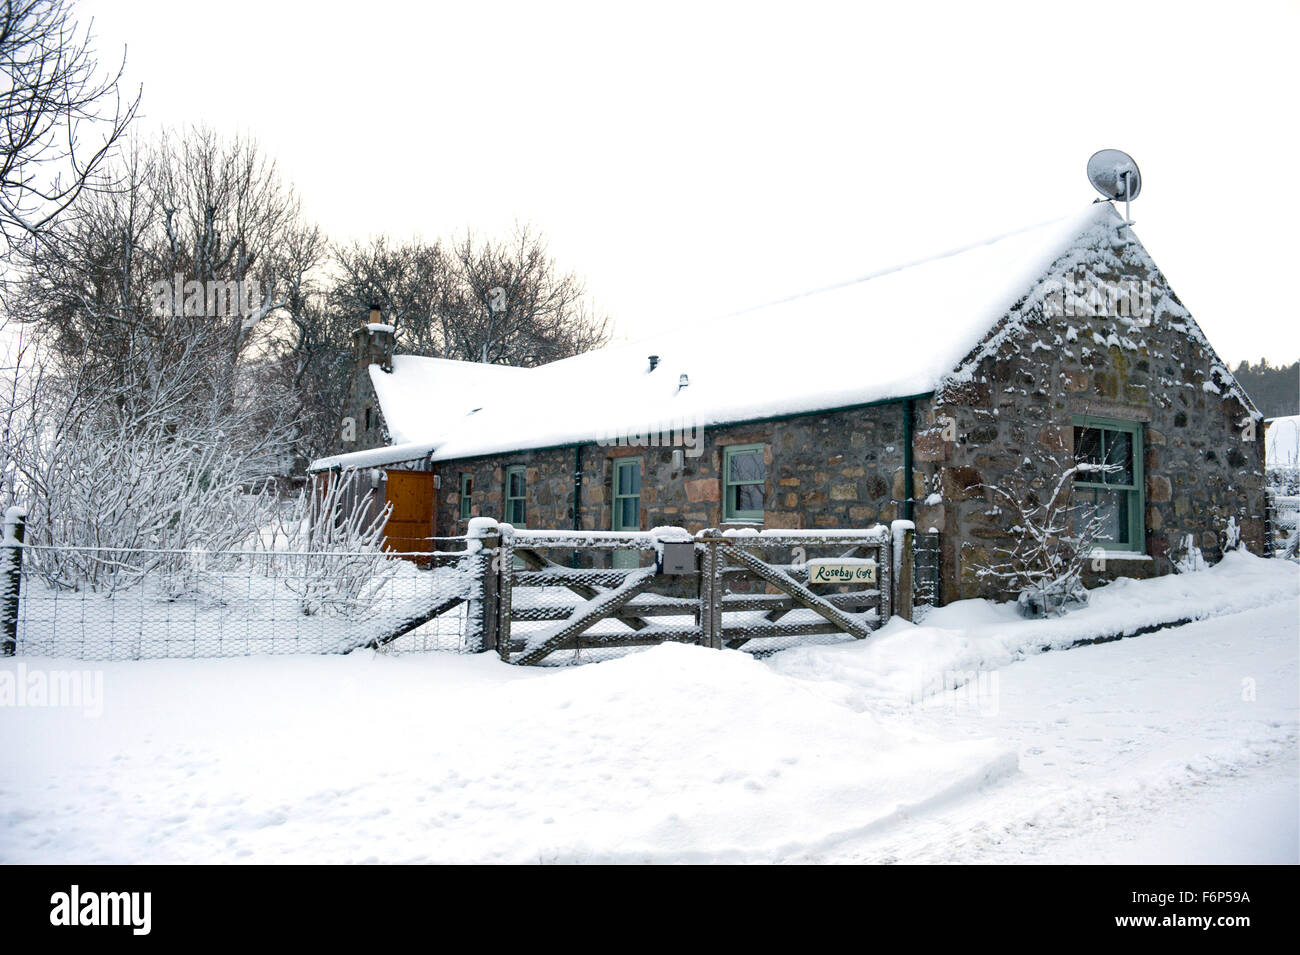 A remote converted steading in Scotland caught in winters grip of snow and ice Stock Photo